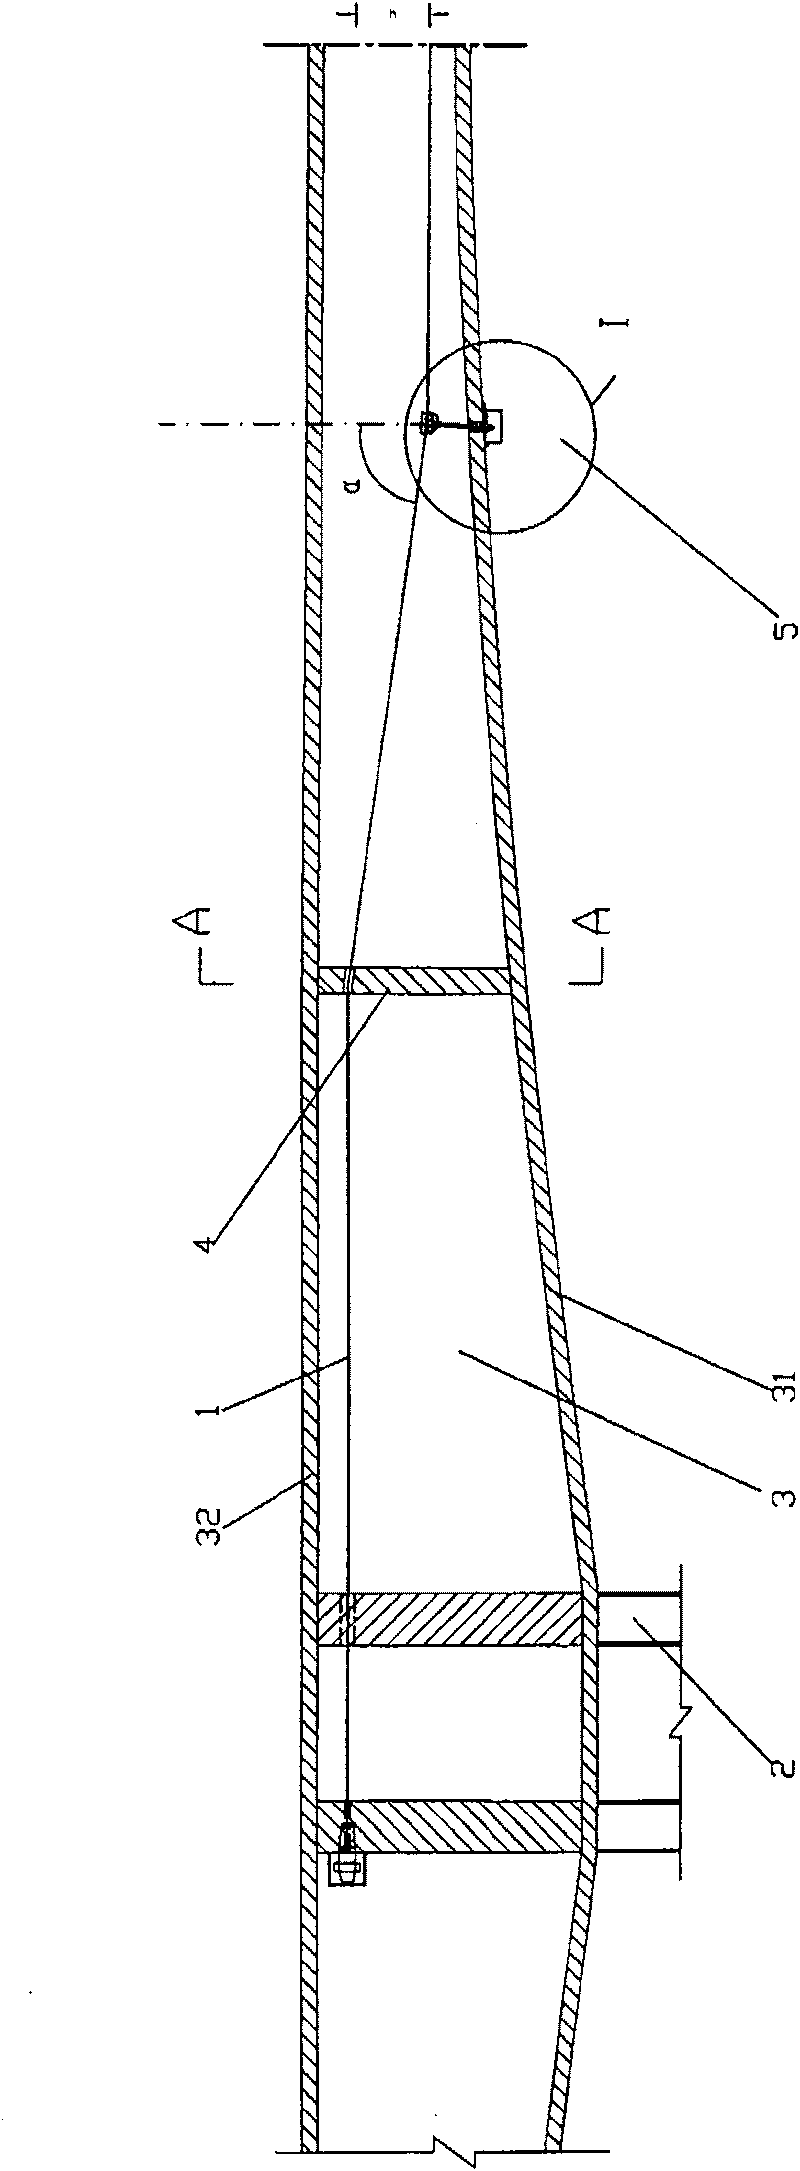 External transverse tension prestressing force device for regulating and controlling large-span continuous steel bridge post deflection